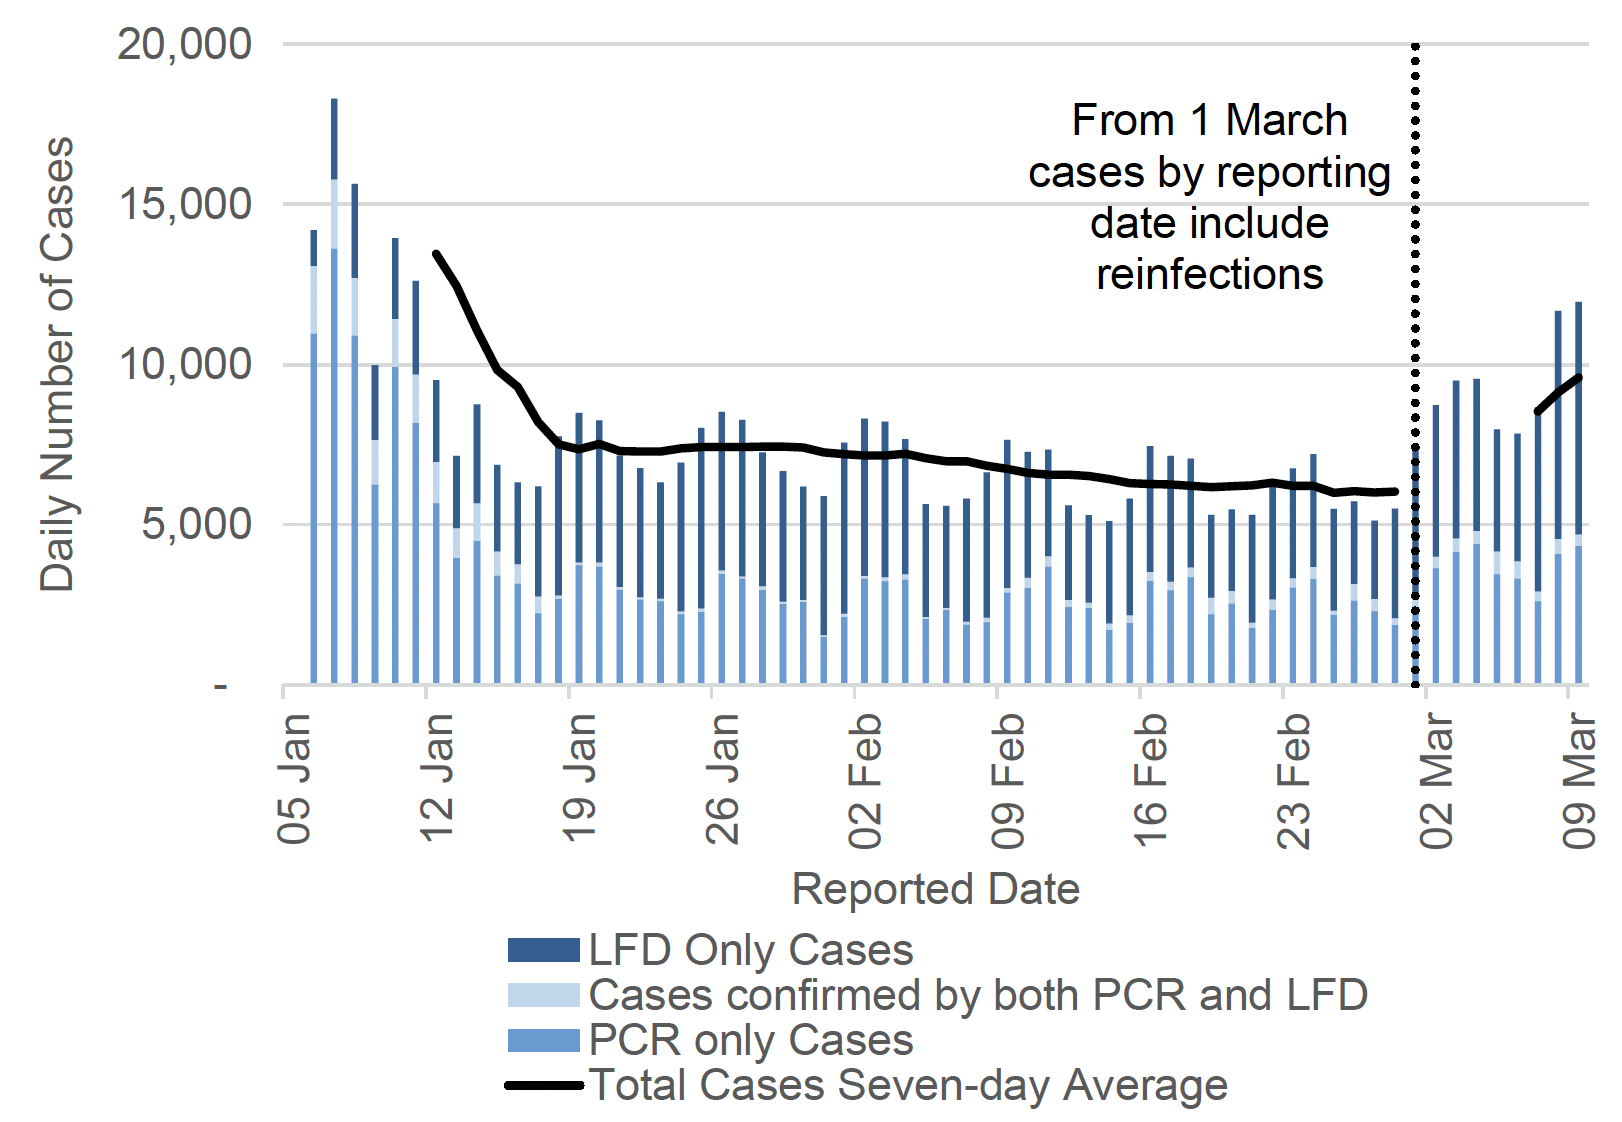 a bar chart showing daily PCR and LFD case numbers by reporting date from January up to and including March 2022, with a line showing 7 day average total number of positive cases. While the number of daily reported cases fluctuate throughout the week, the total-seven day average has been on a decreasing trend since early January, with an increase visible in early March. The chart has a note that says: “from 1 March cases by reporting date include reinfections”. Before 1 March, the daily case number includes only first episode infections.